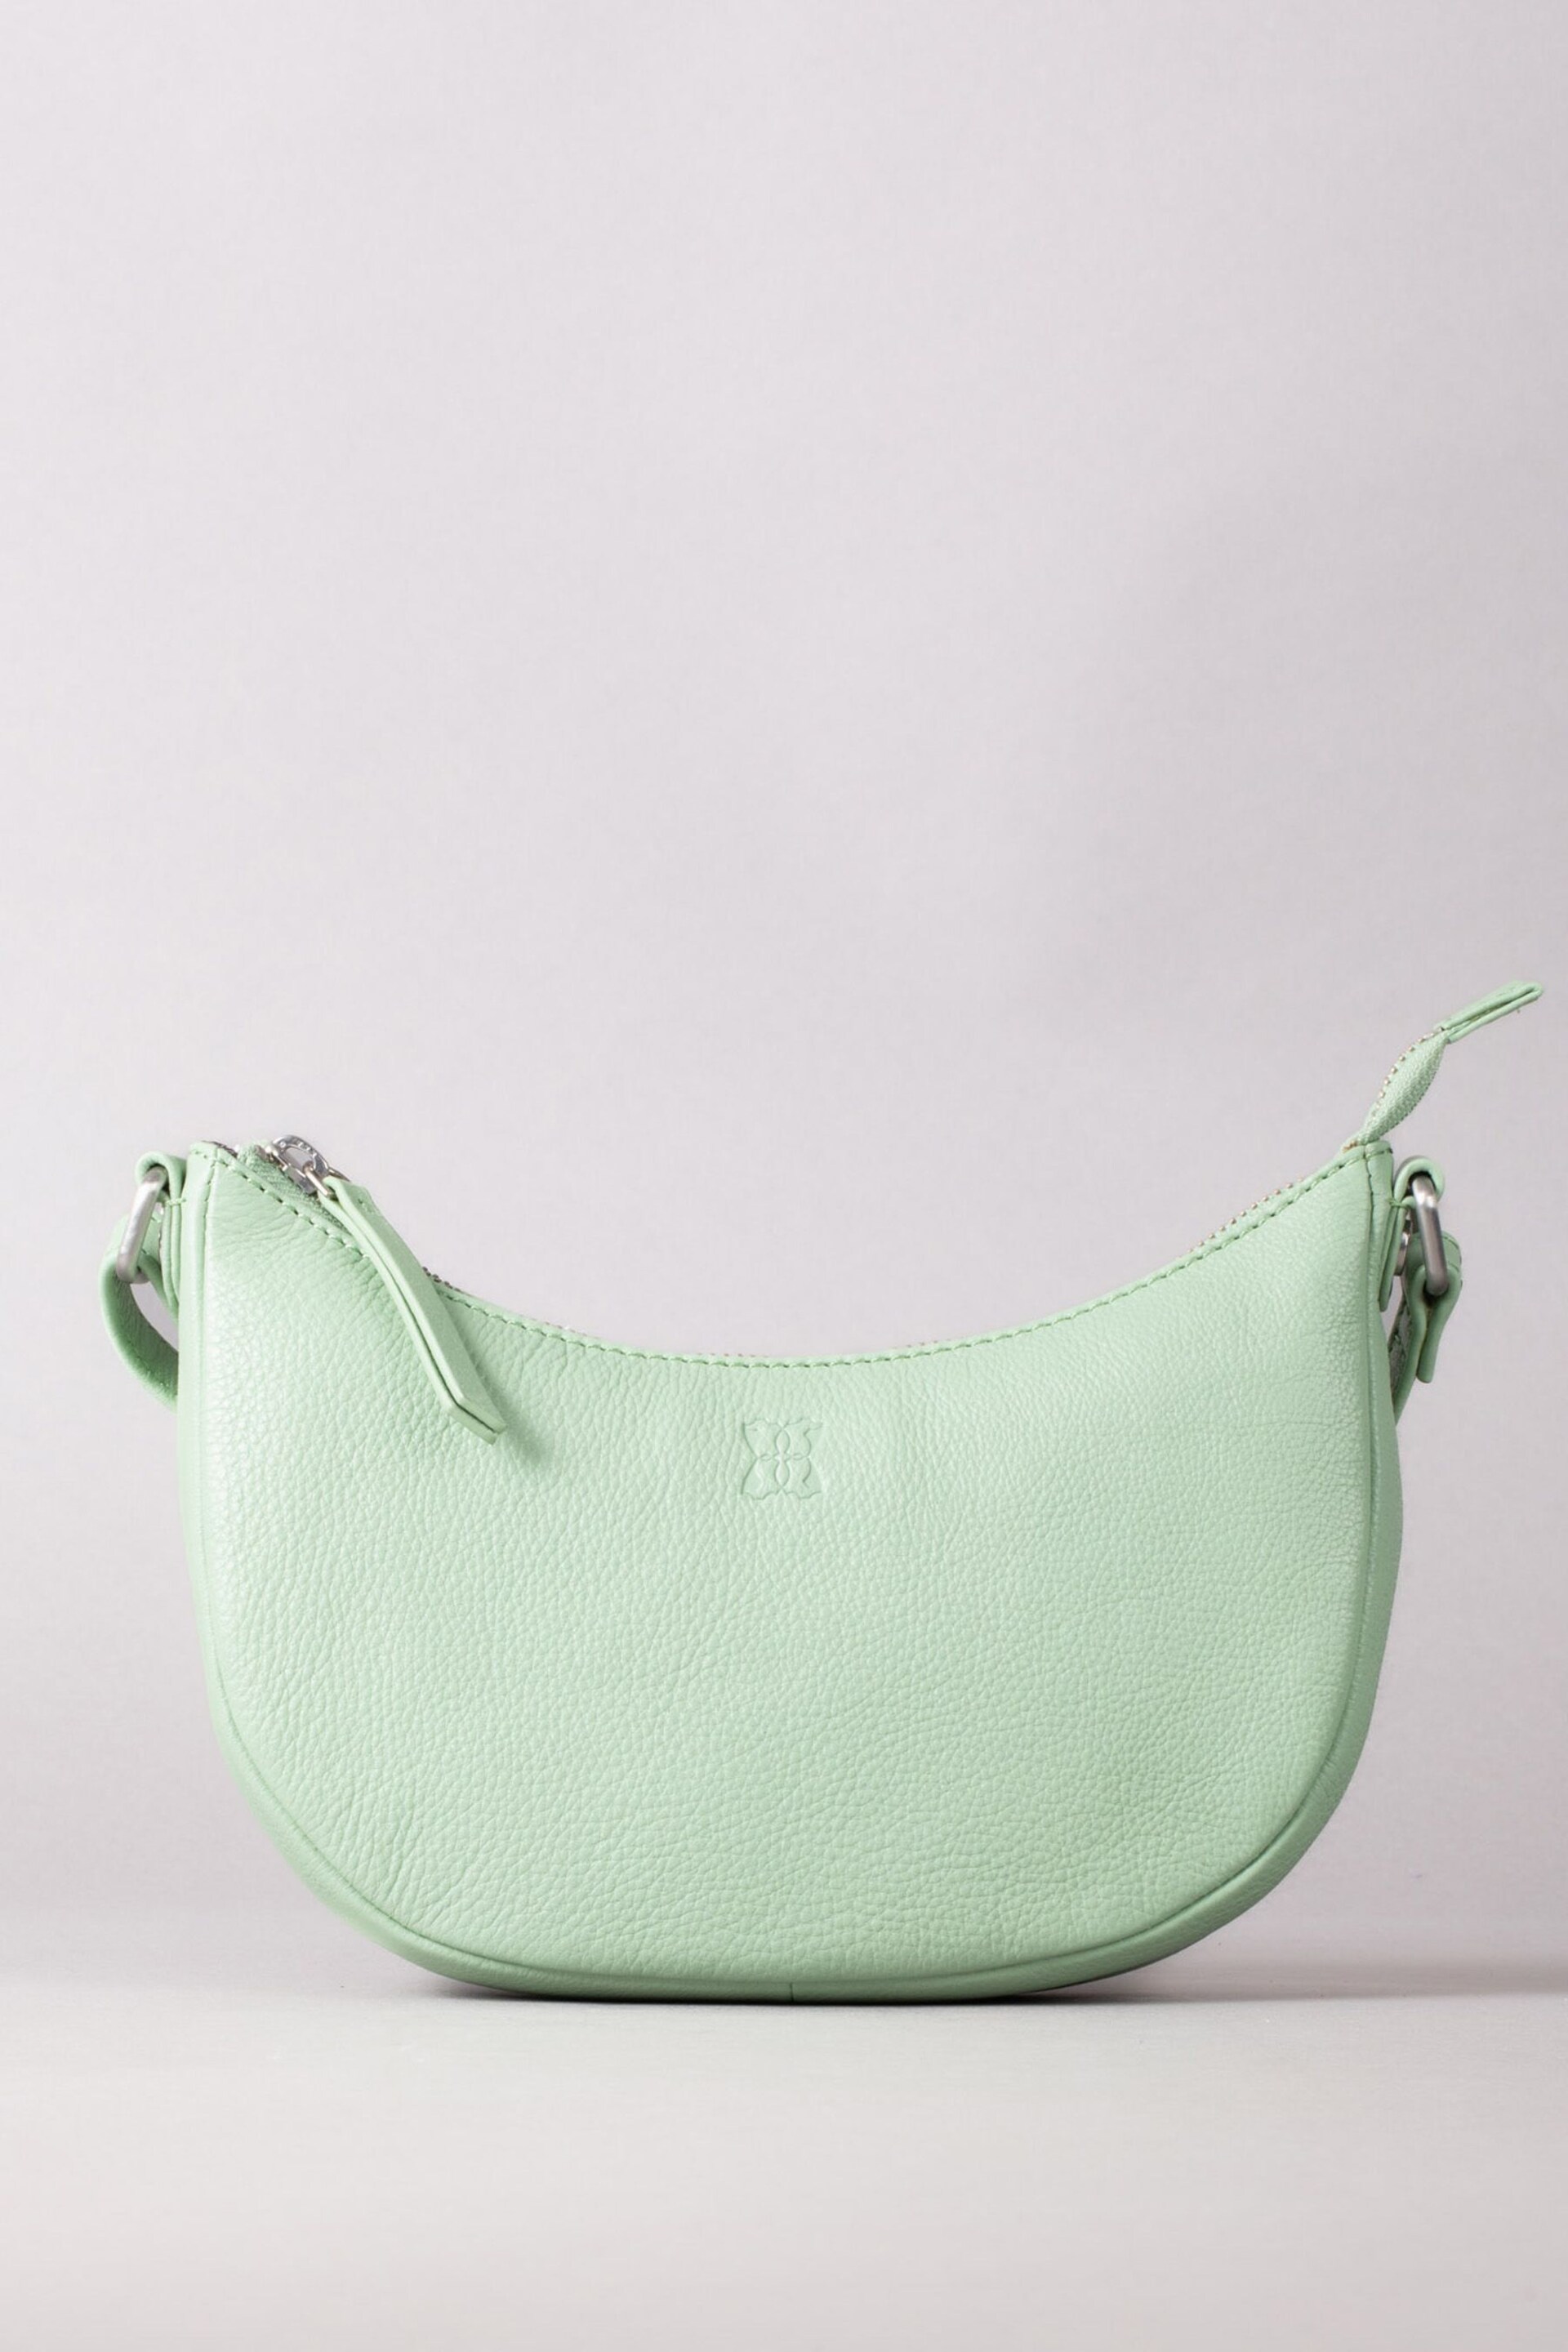 Lakeland Leather Green Coniston Crescent Cross-Body Bag - Image 2 of 6